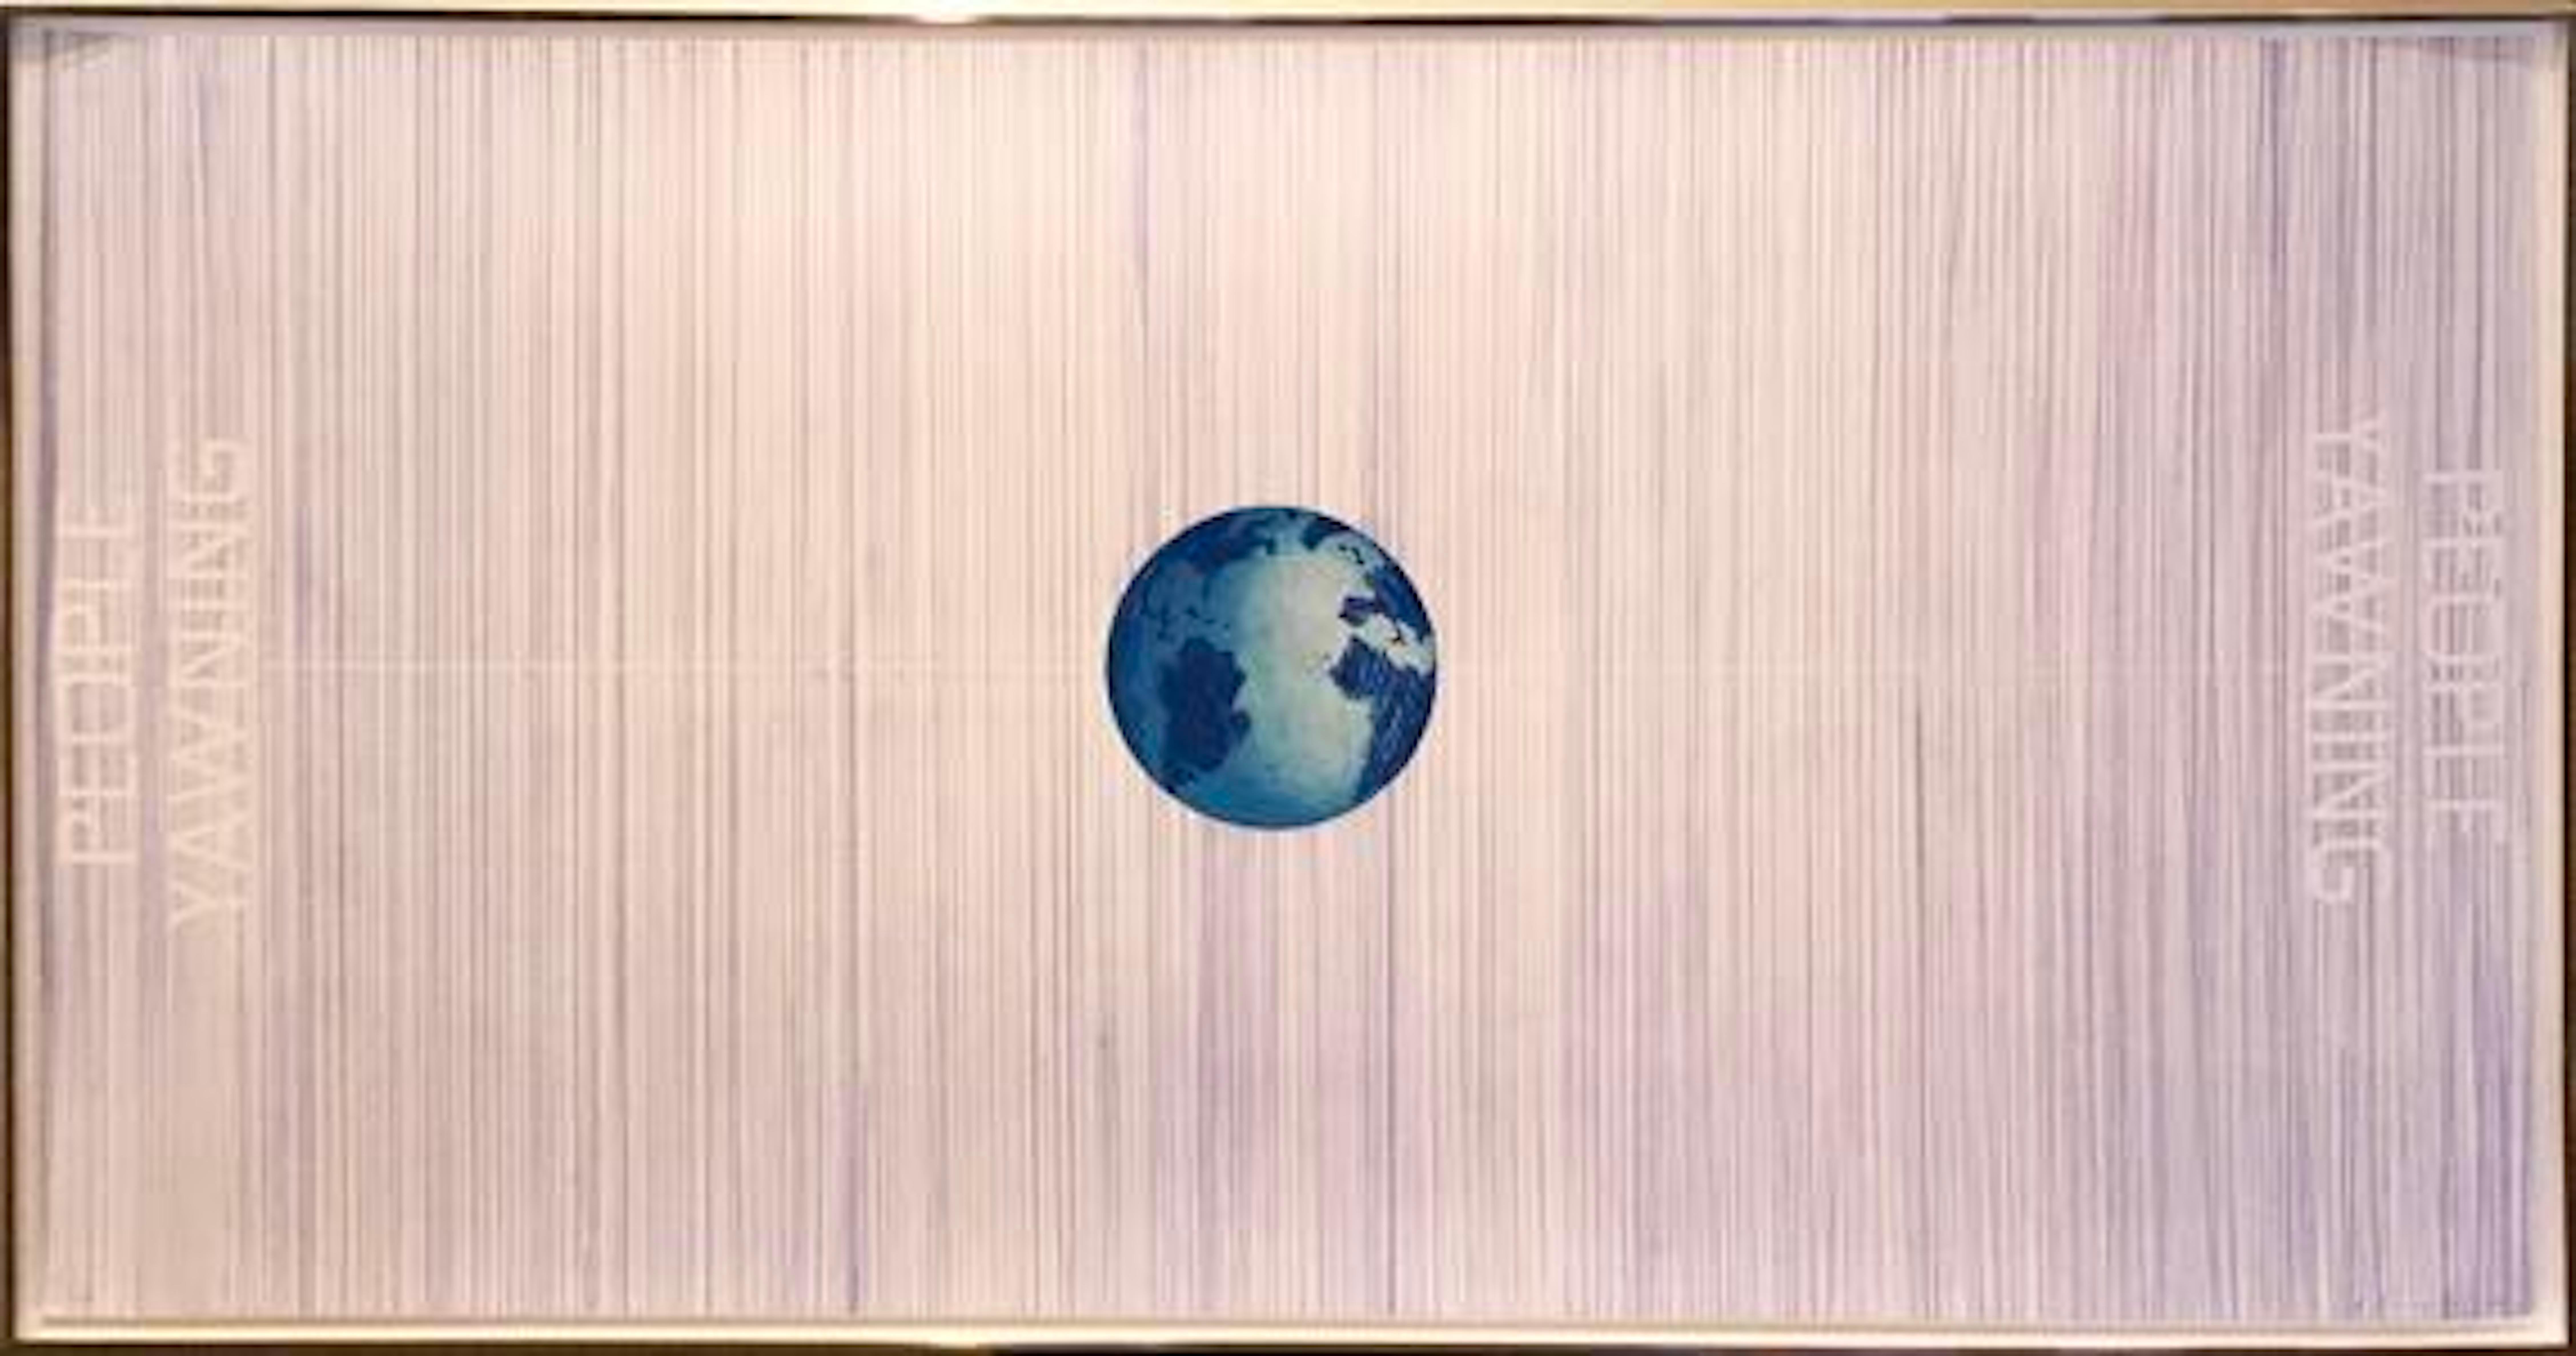 People Yawning (from the World Series); 1982; Lithograph on Arches 88 paper - Print by Ed Ruscha